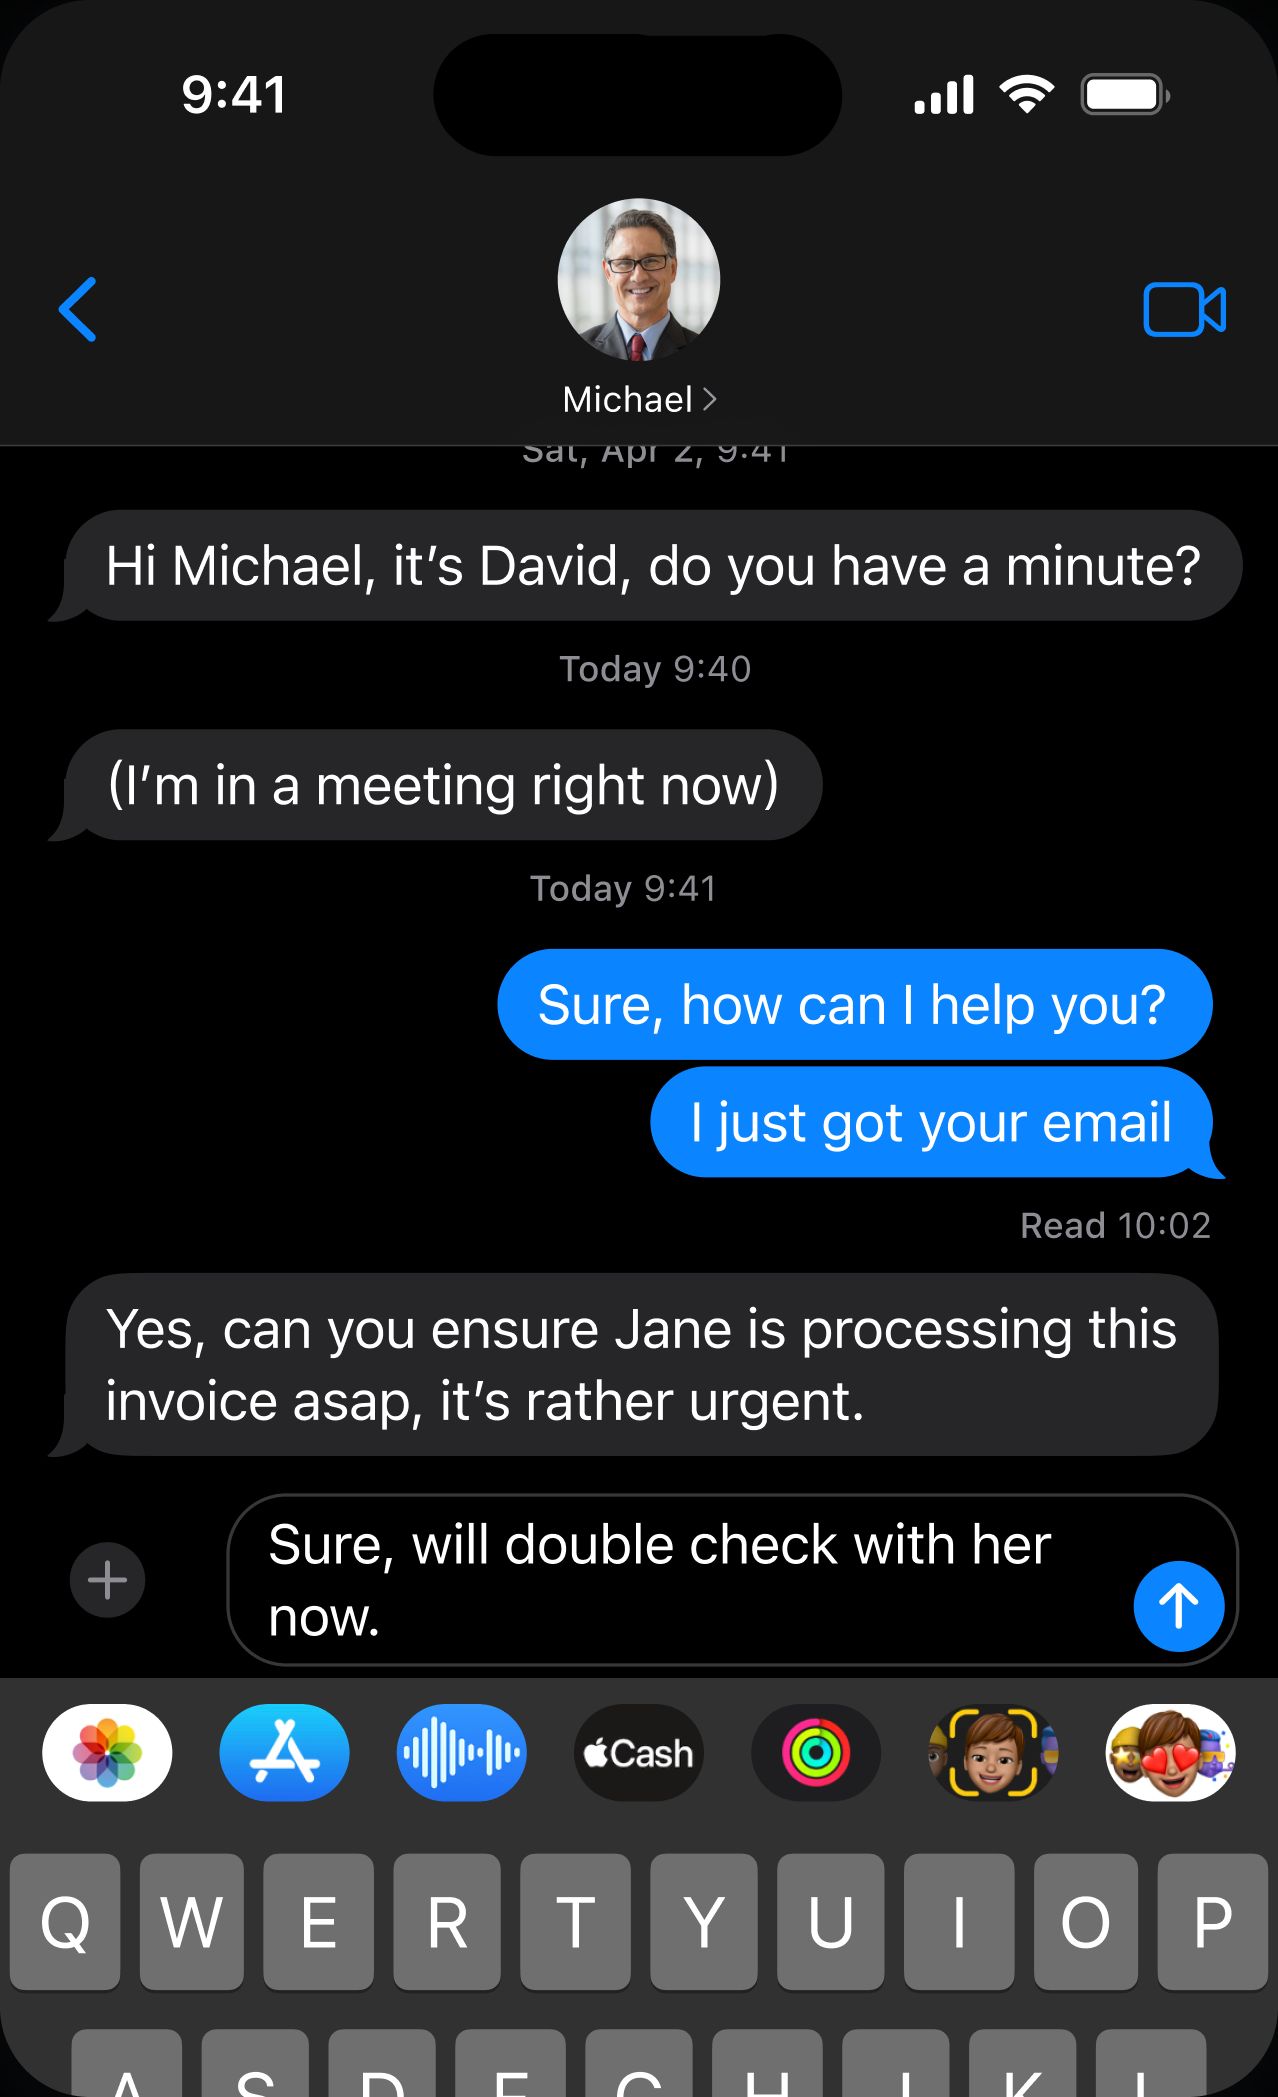 CEO Fraud Text Message